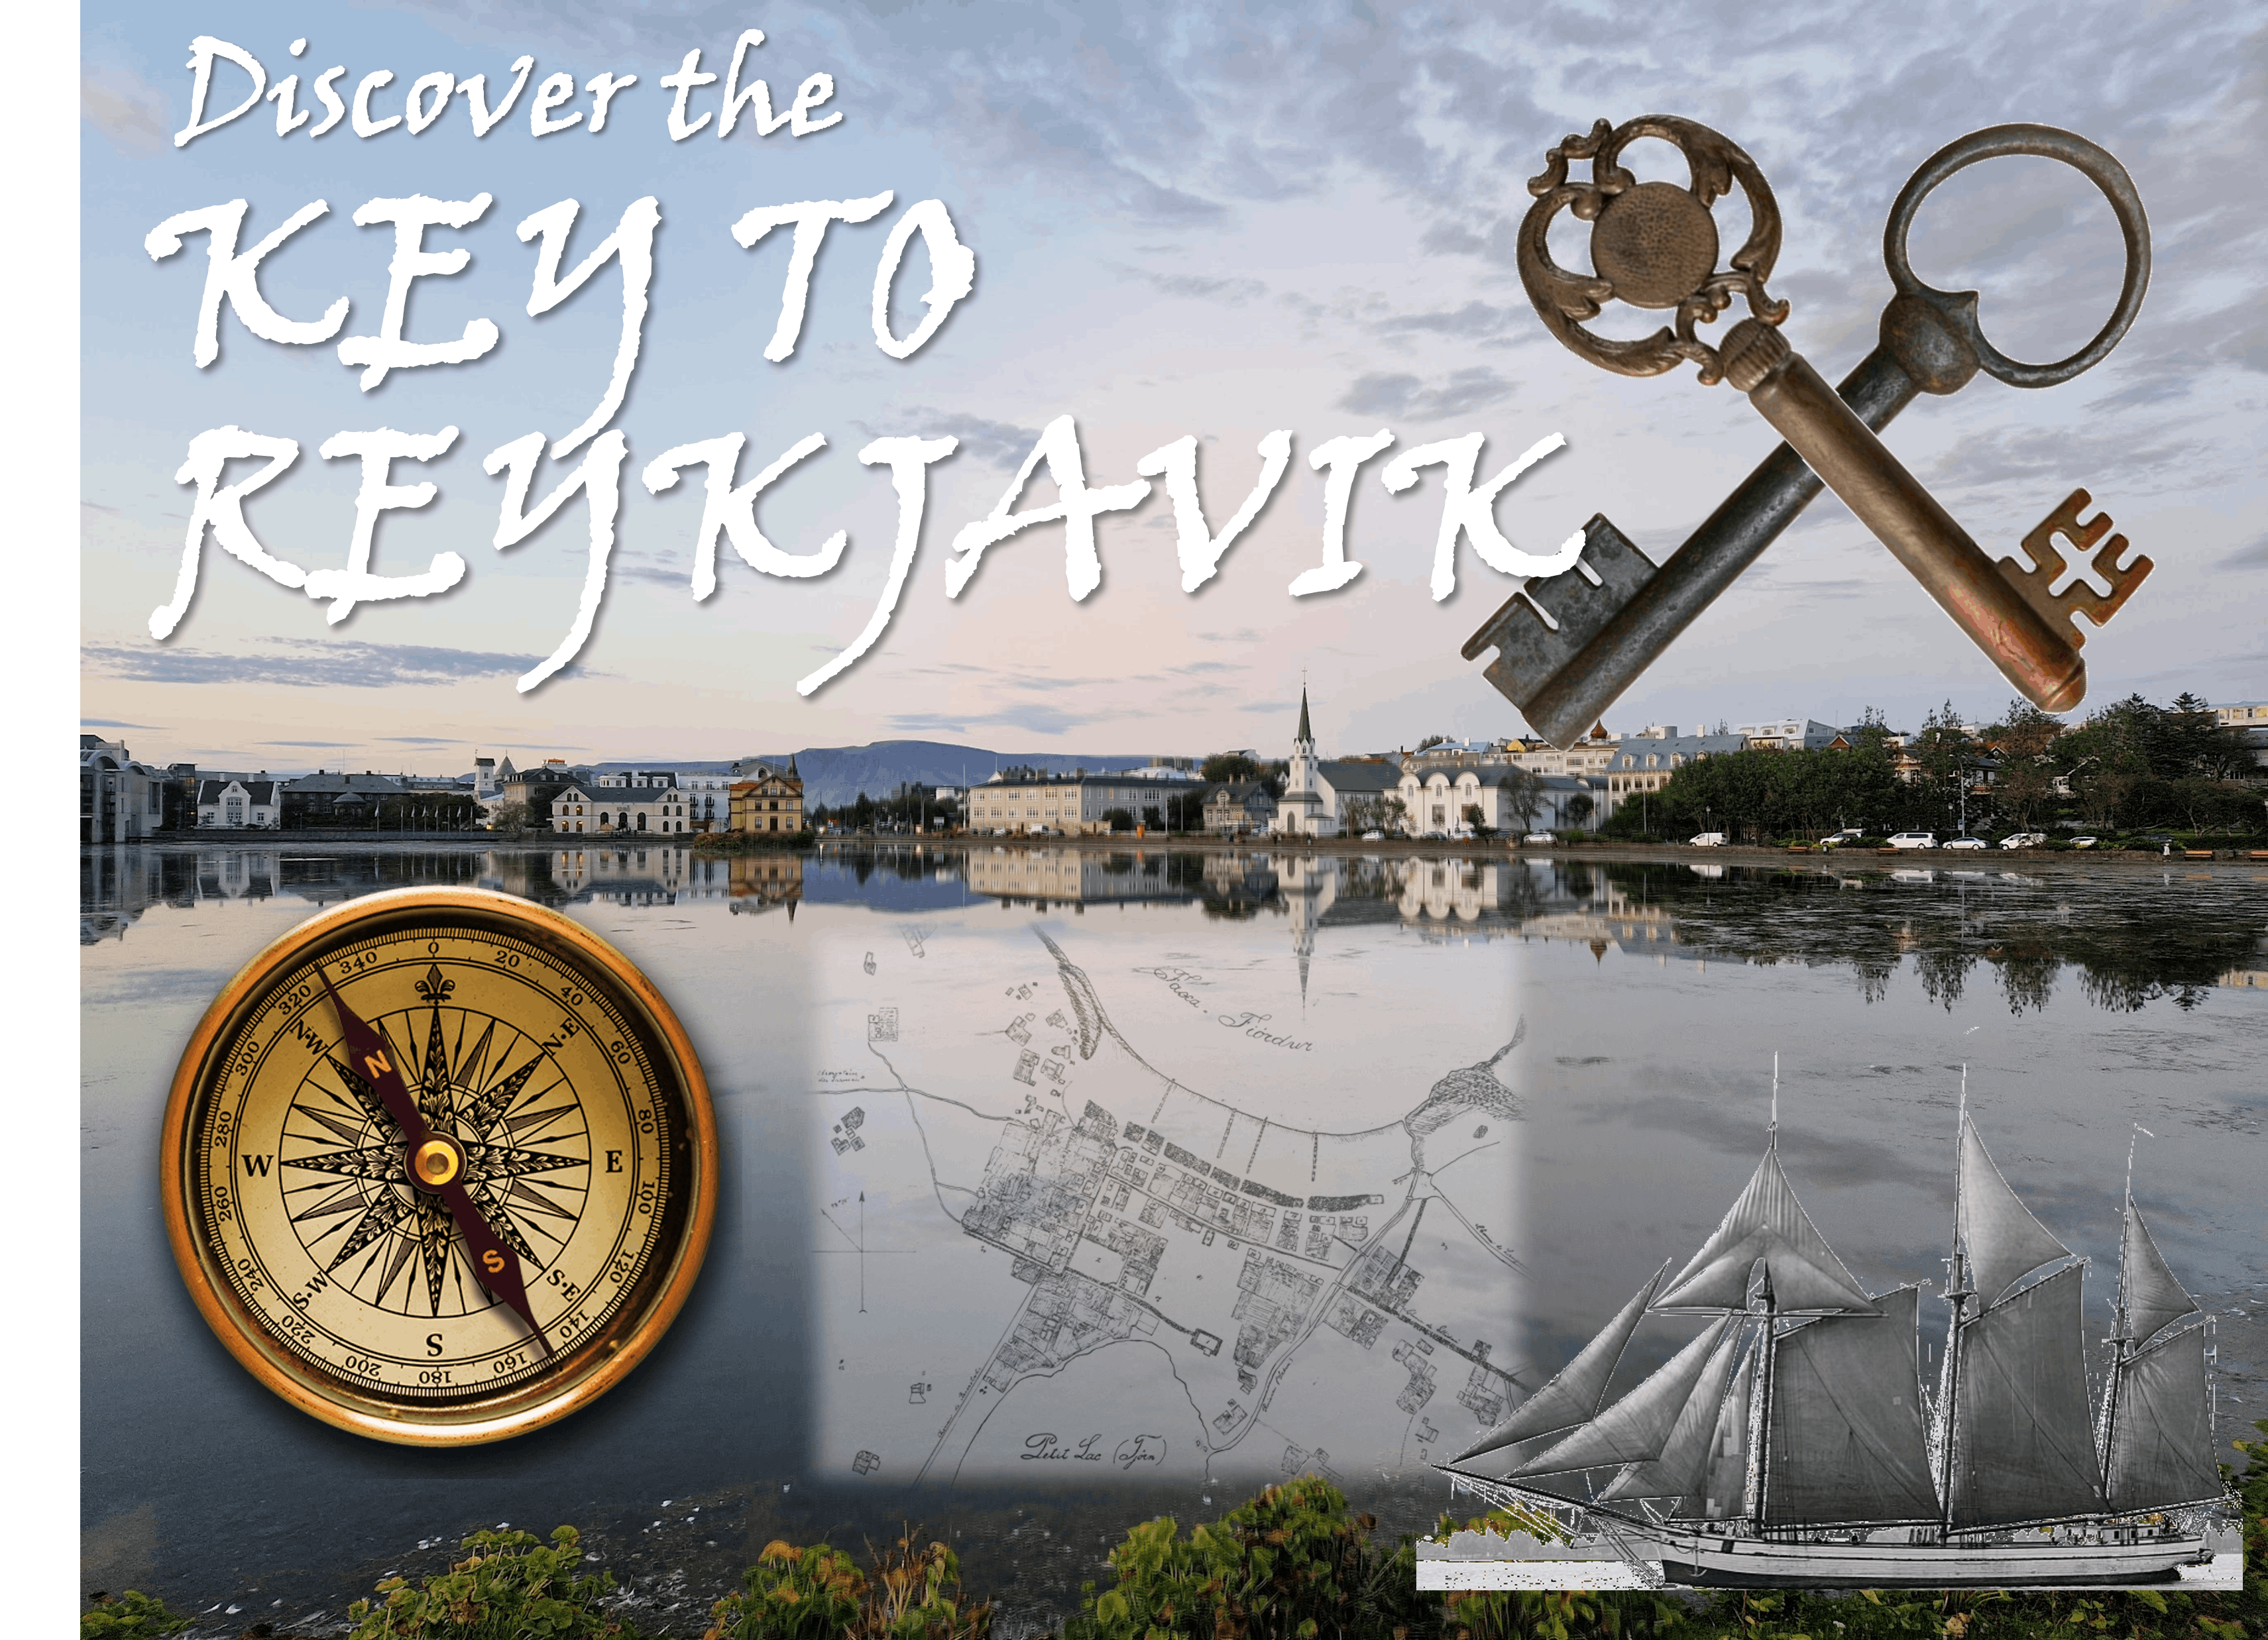 Discover the key to Reykjavik image